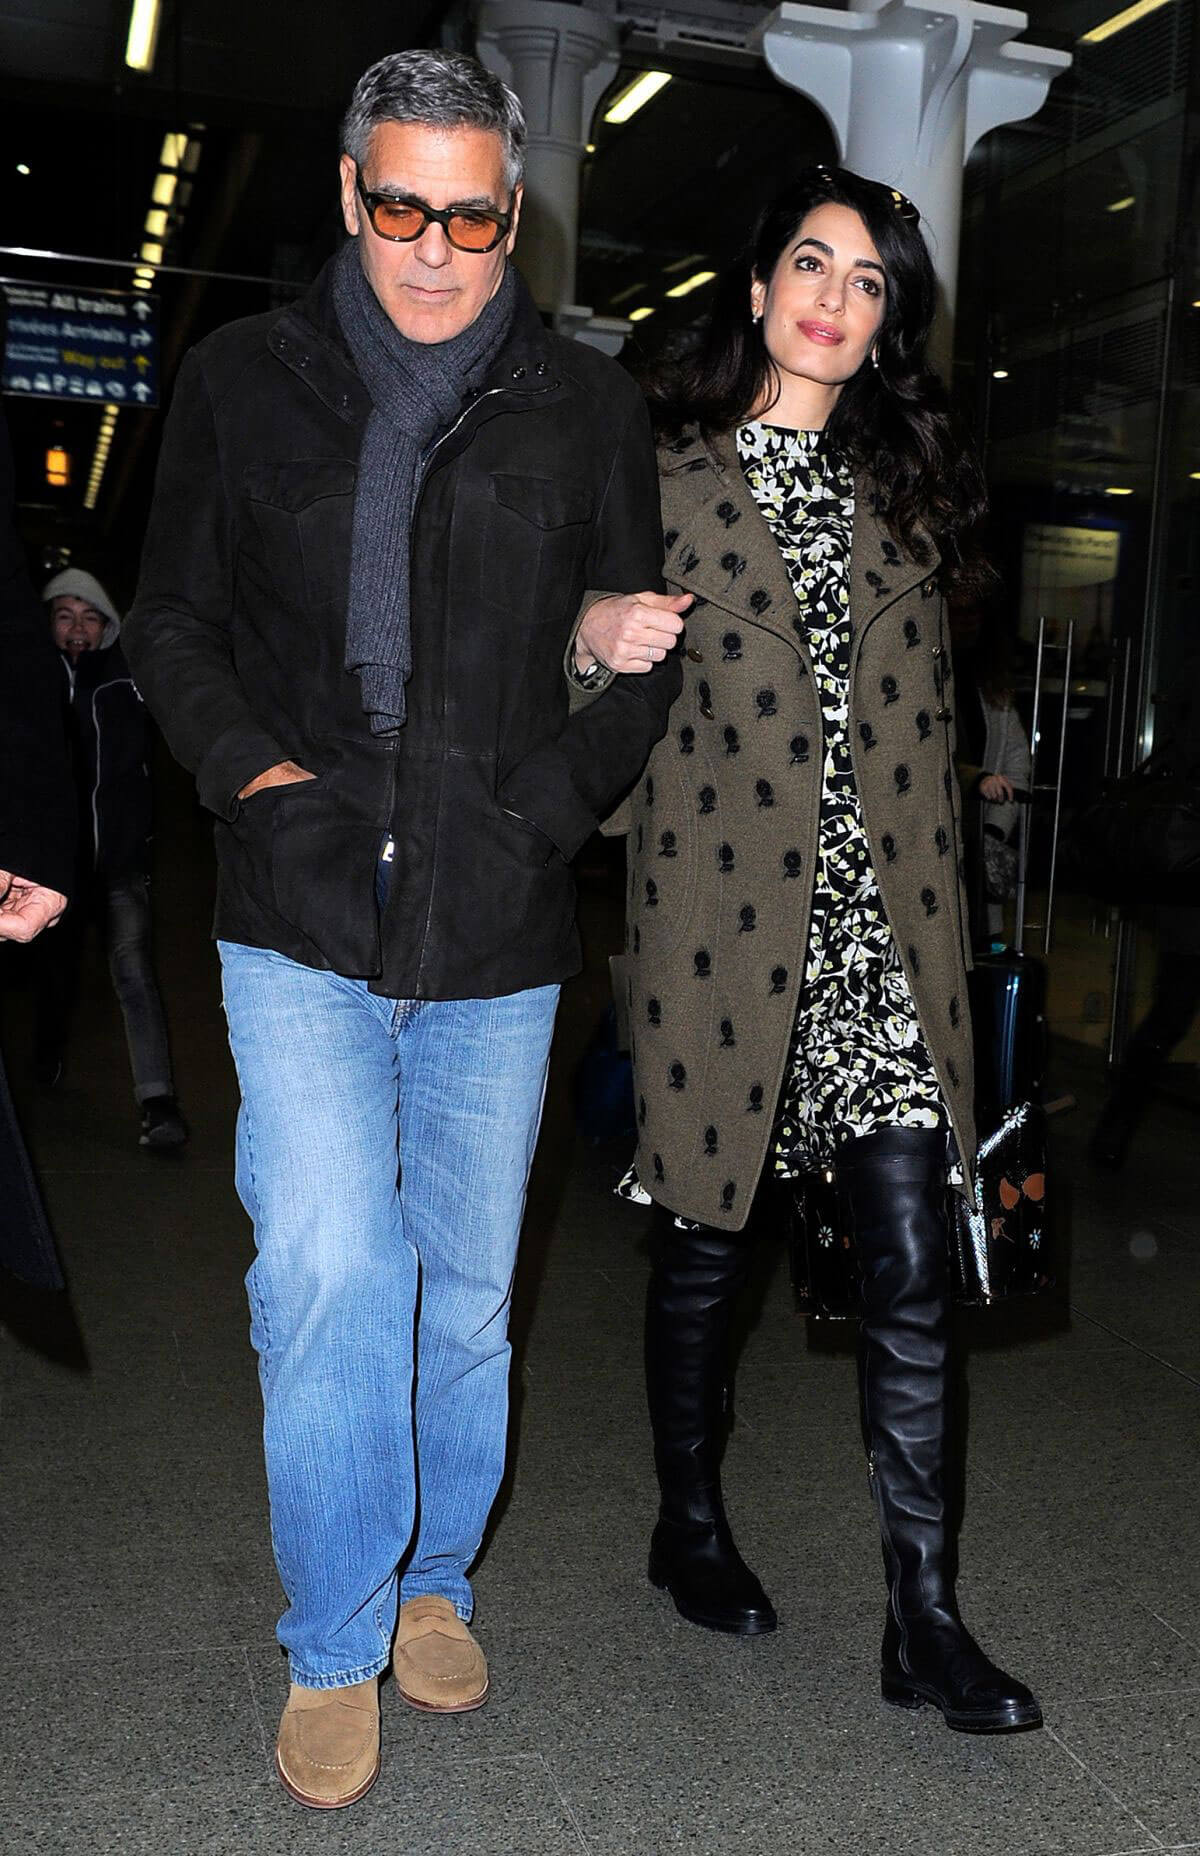 Amal Clooney and George Clooney at St Pancras Eurostar in London